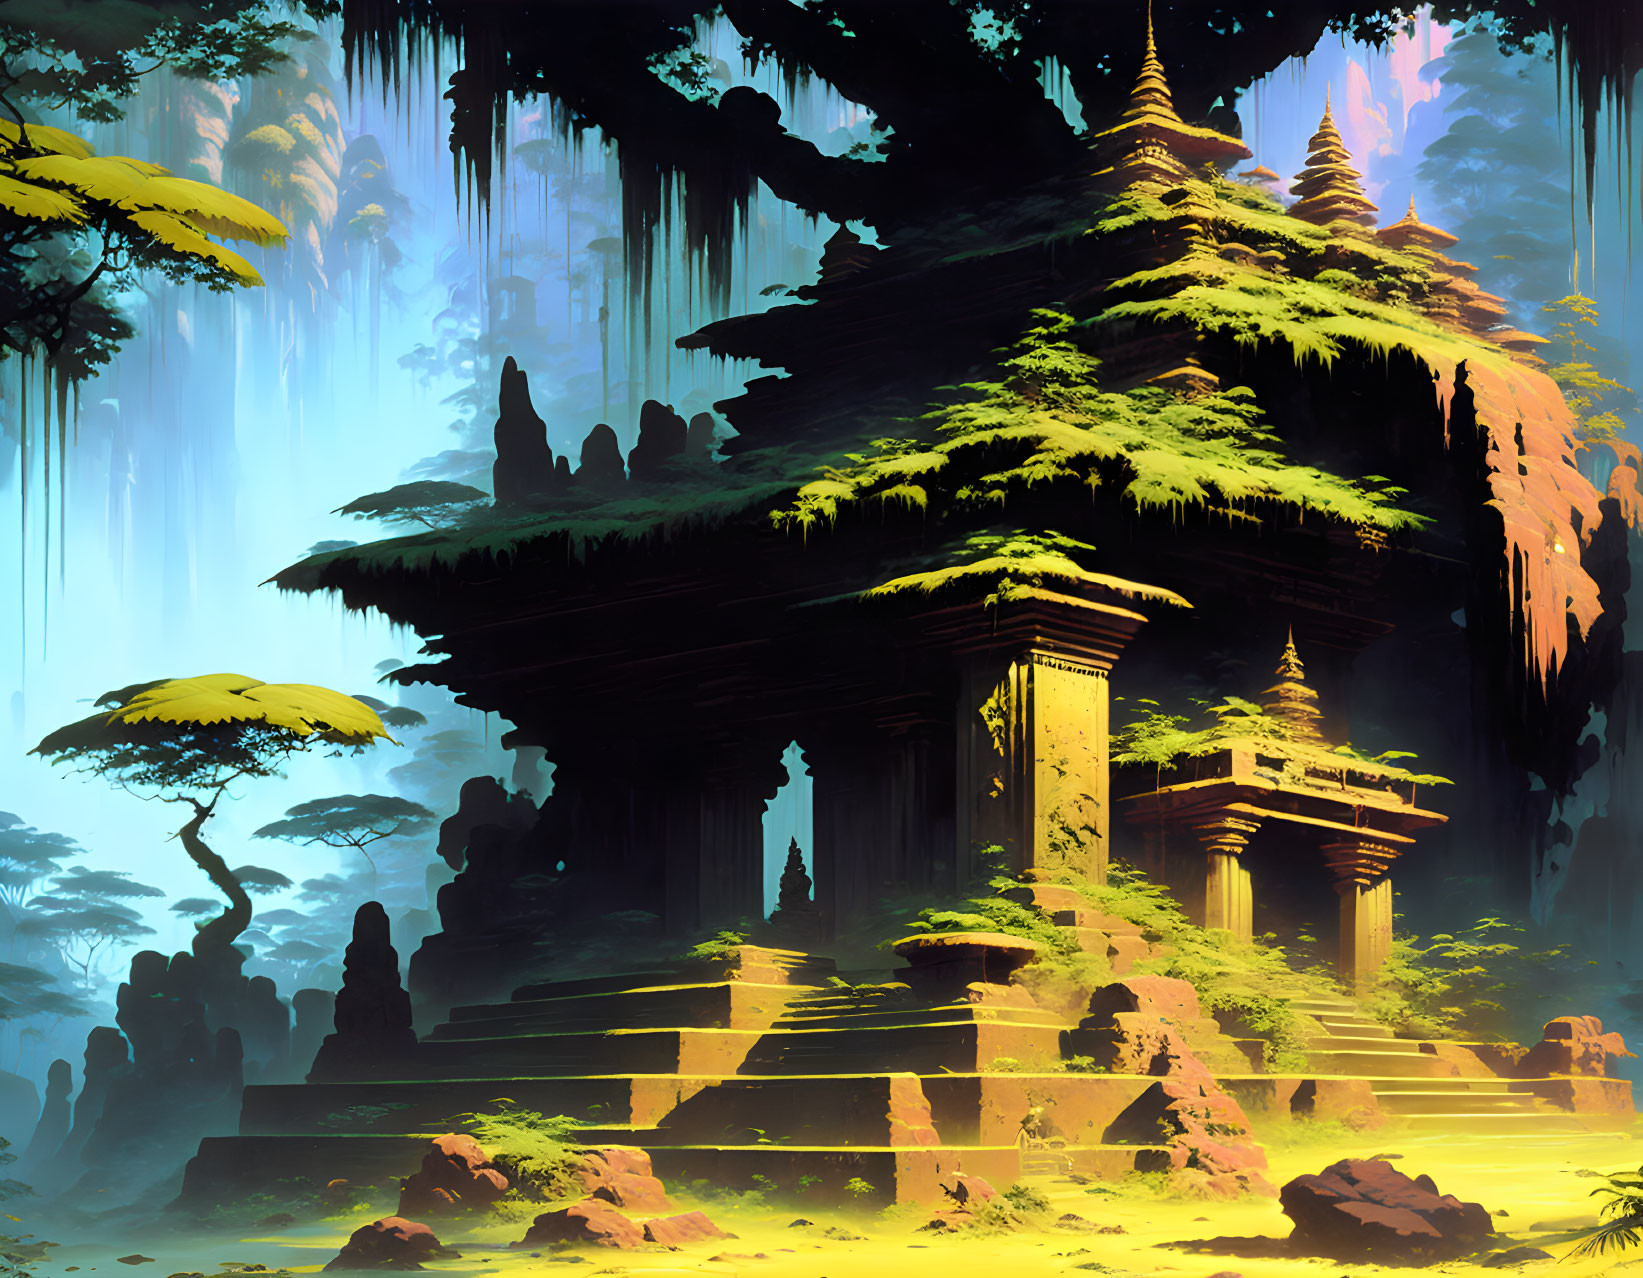 Ancient multi-tiered temple in lush forest with waterfalls